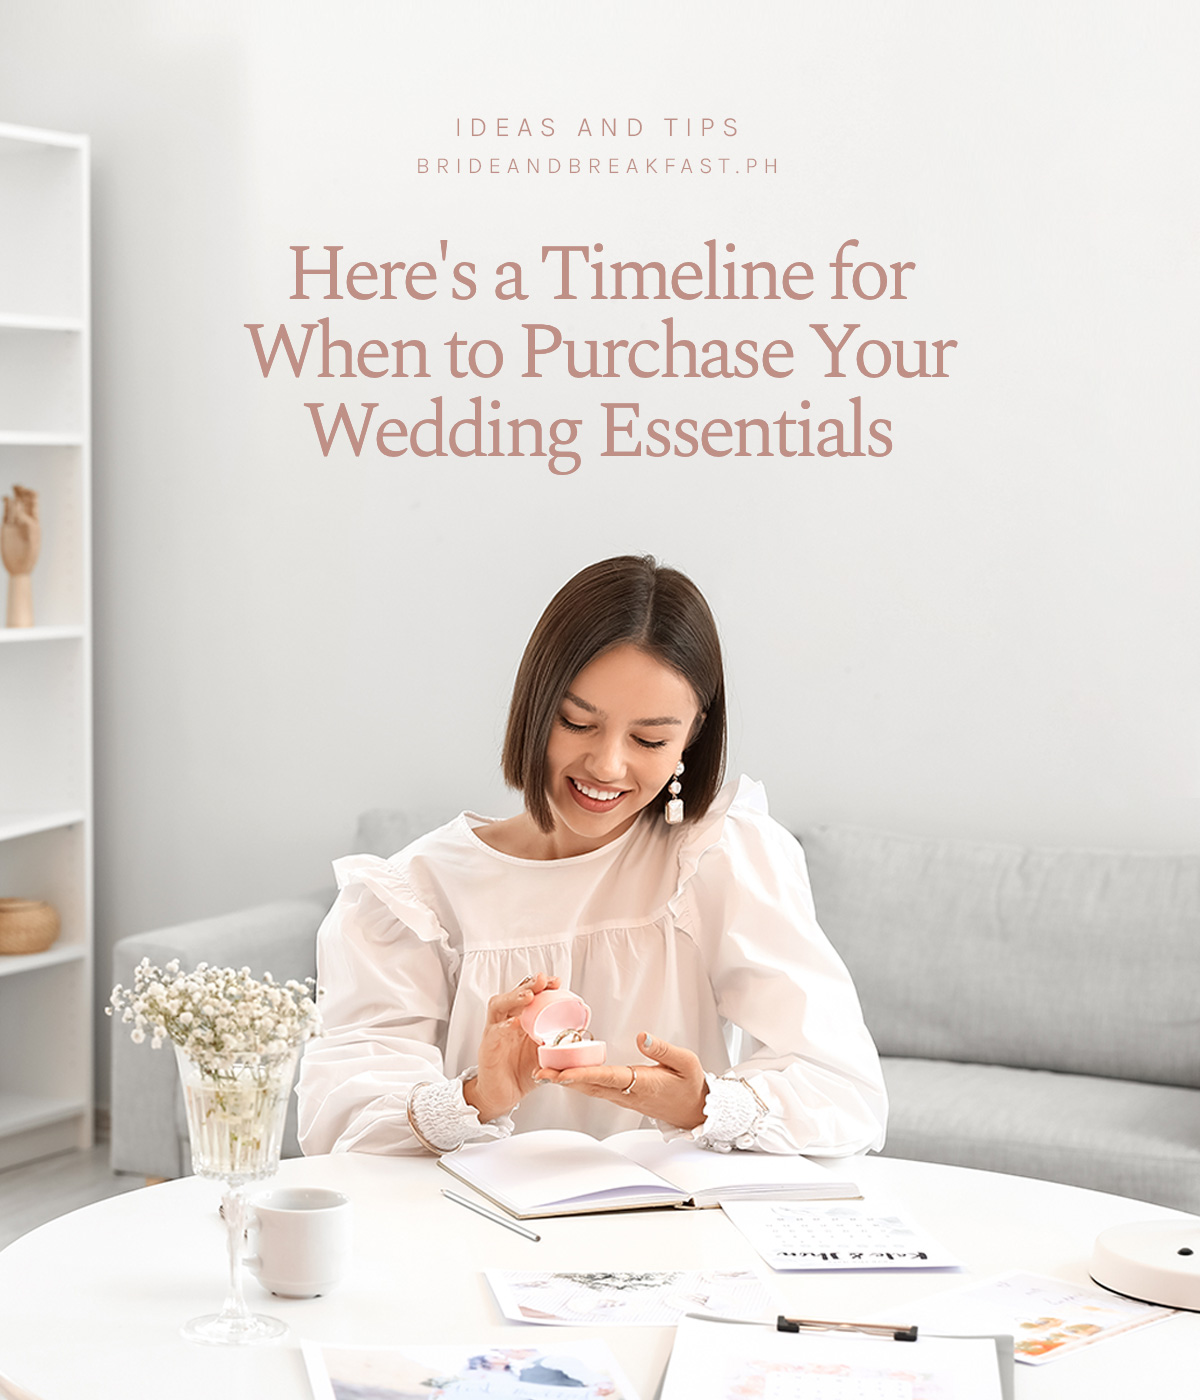 Here's a Timeline for When to Purchase Your Wedding Essentials